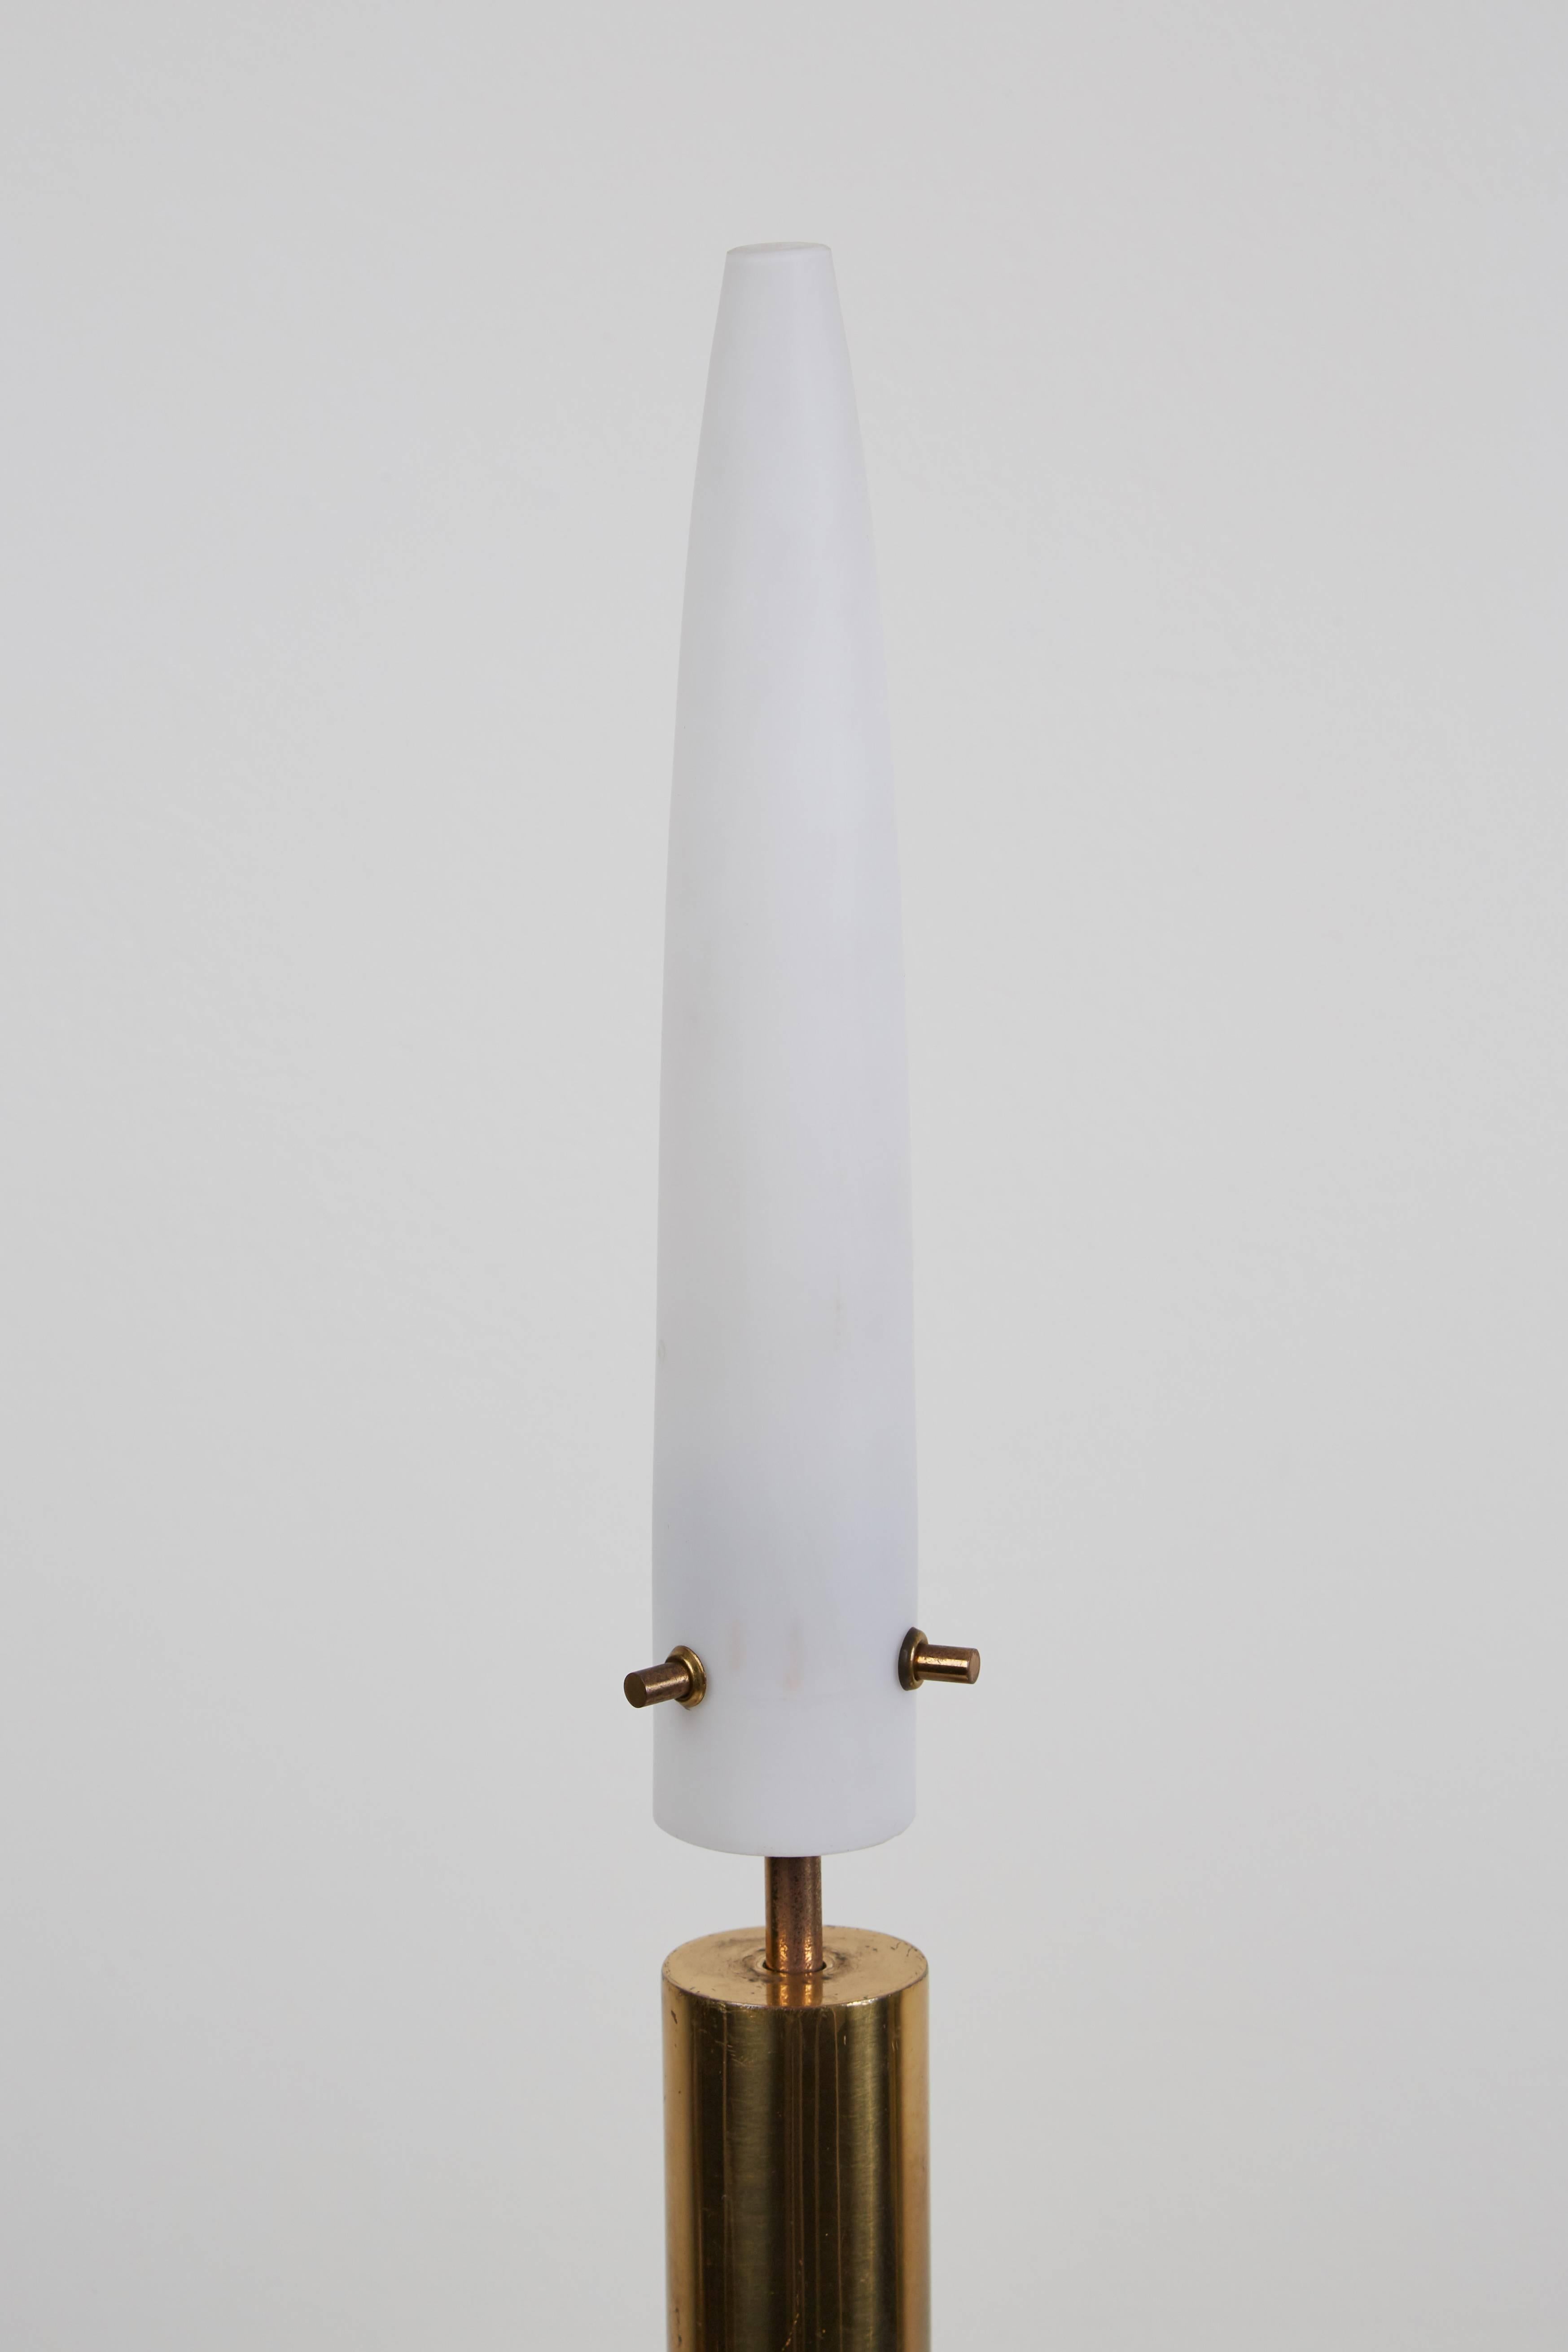 Mid-20th Century Pair of Brass and Satin Glass Italian Table Lamps